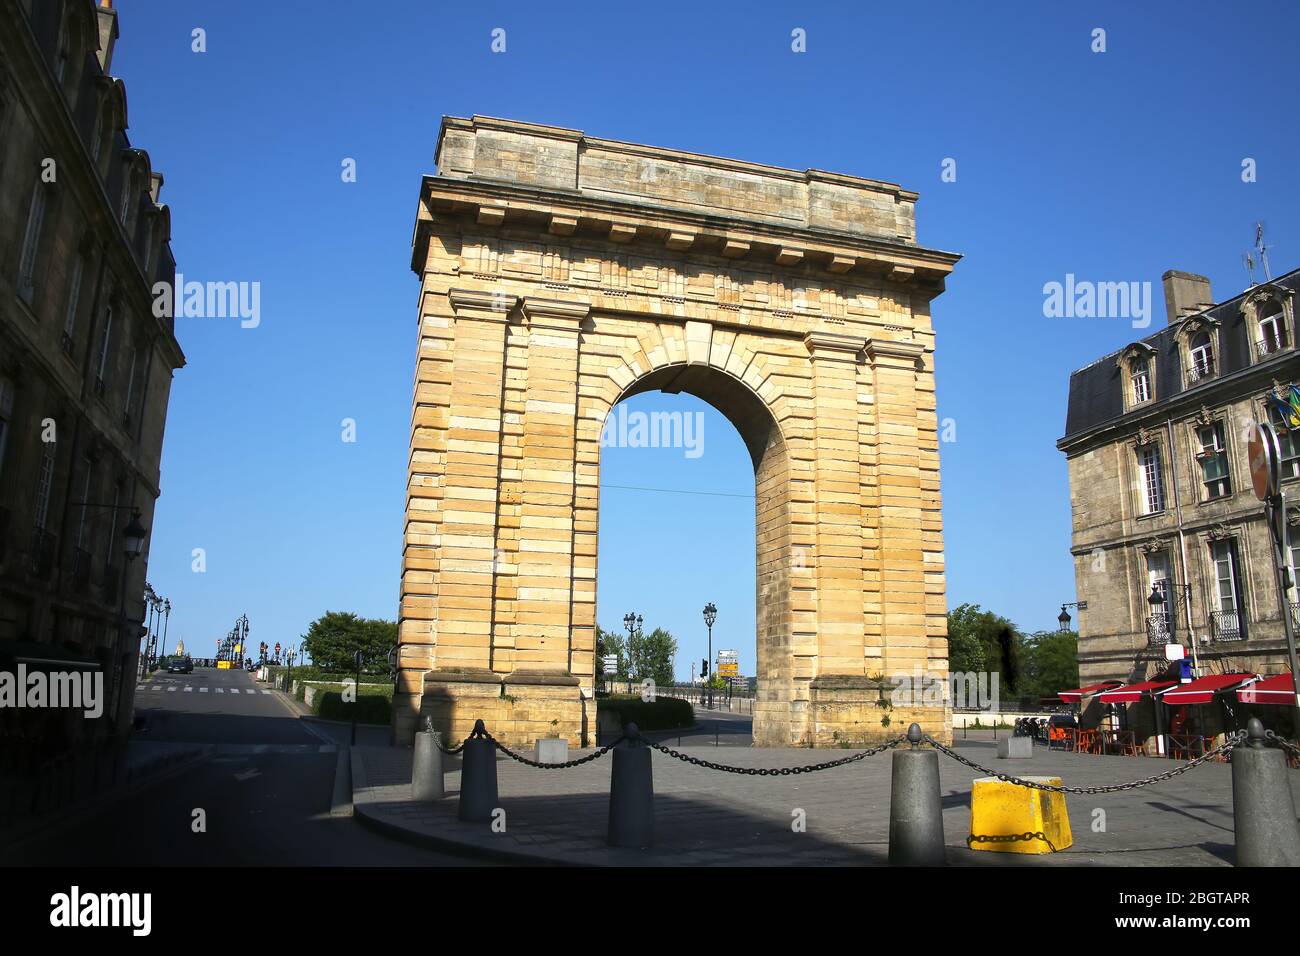 Porte d'Aquitaine is a historic arch located on Place de la Victoire. It is by the end of Rue de Catherine, the shopping street. Bordeaux, France. Stock Photo